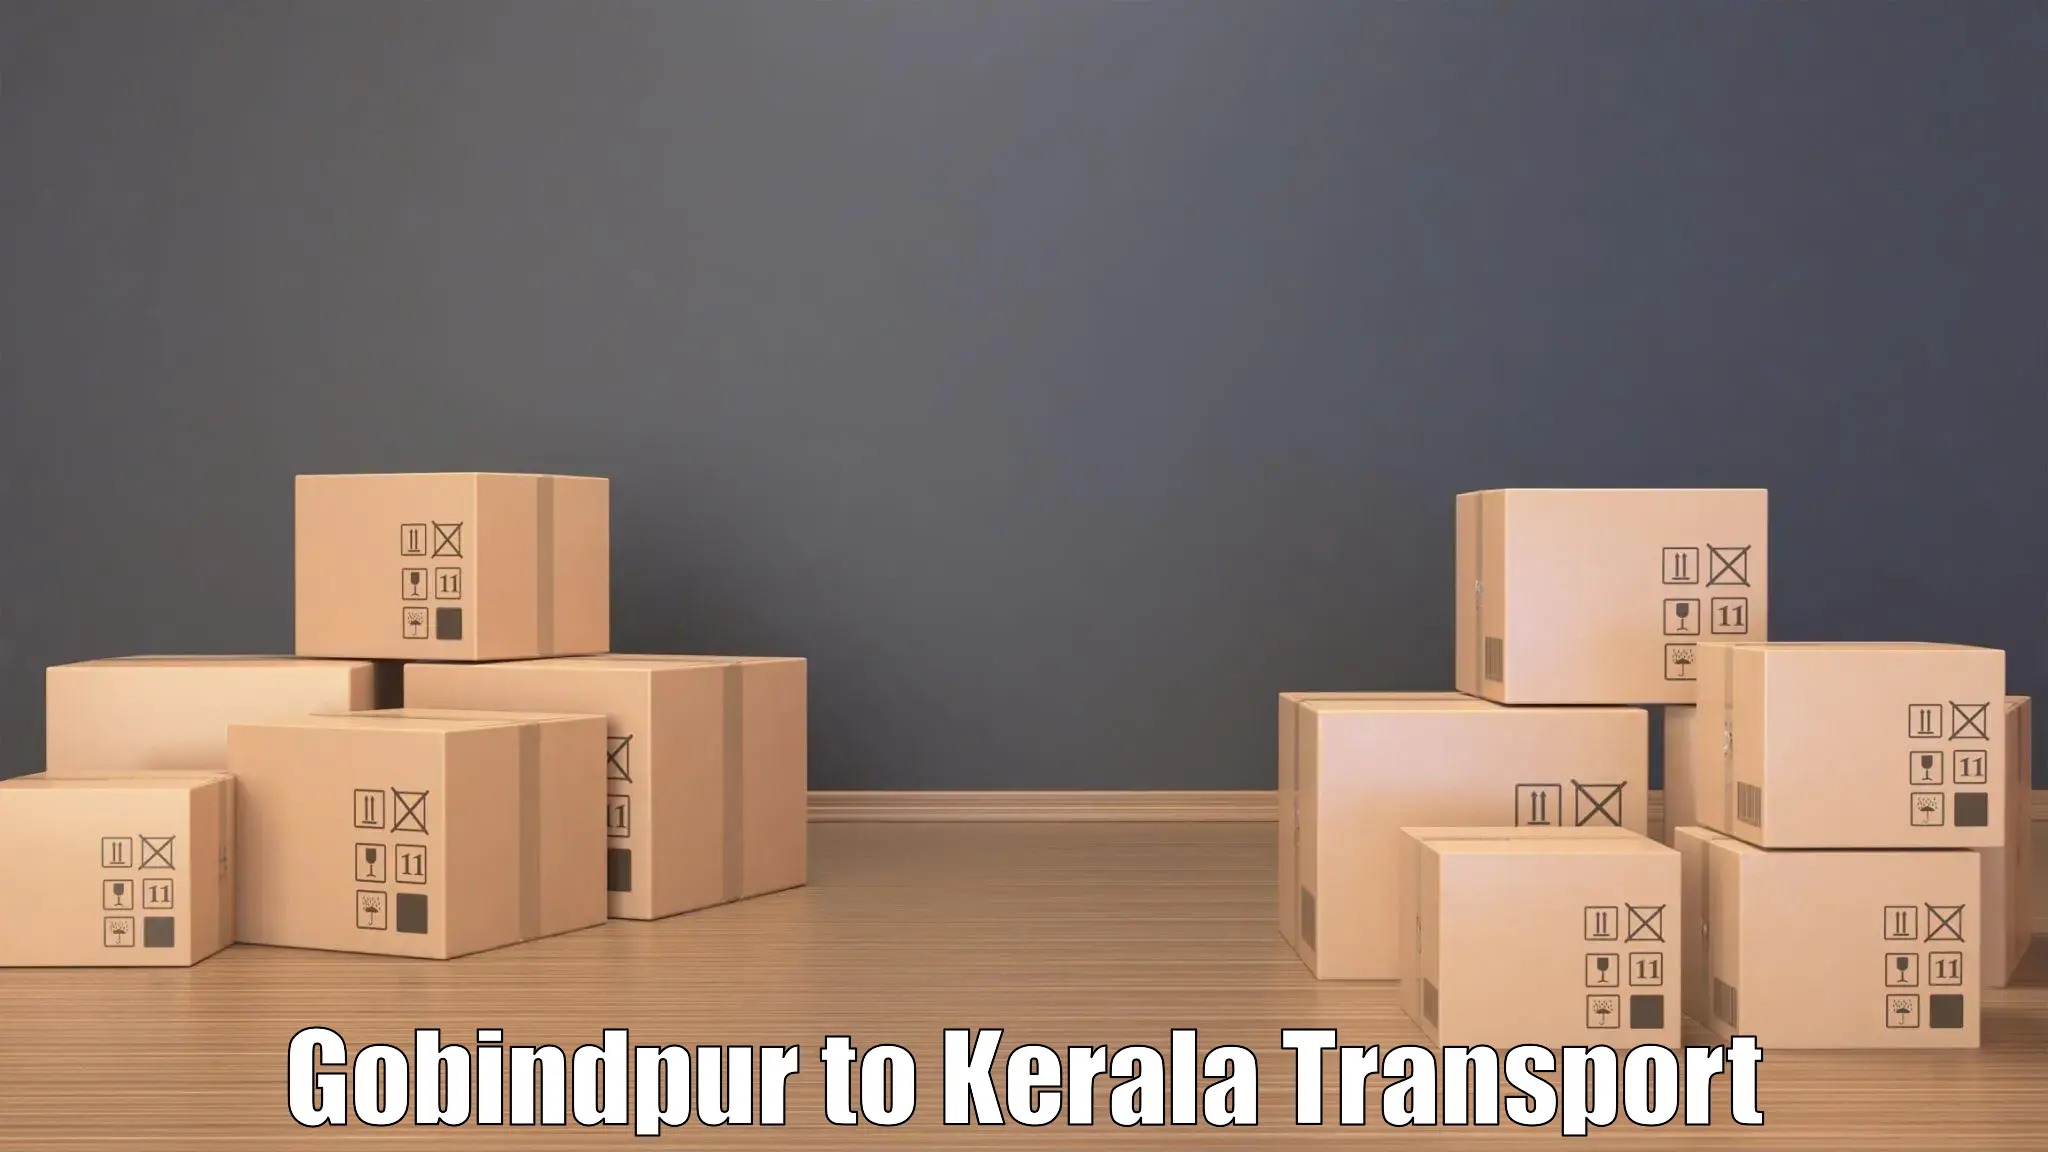 Cargo train transport services in Gobindpur to Angamaly